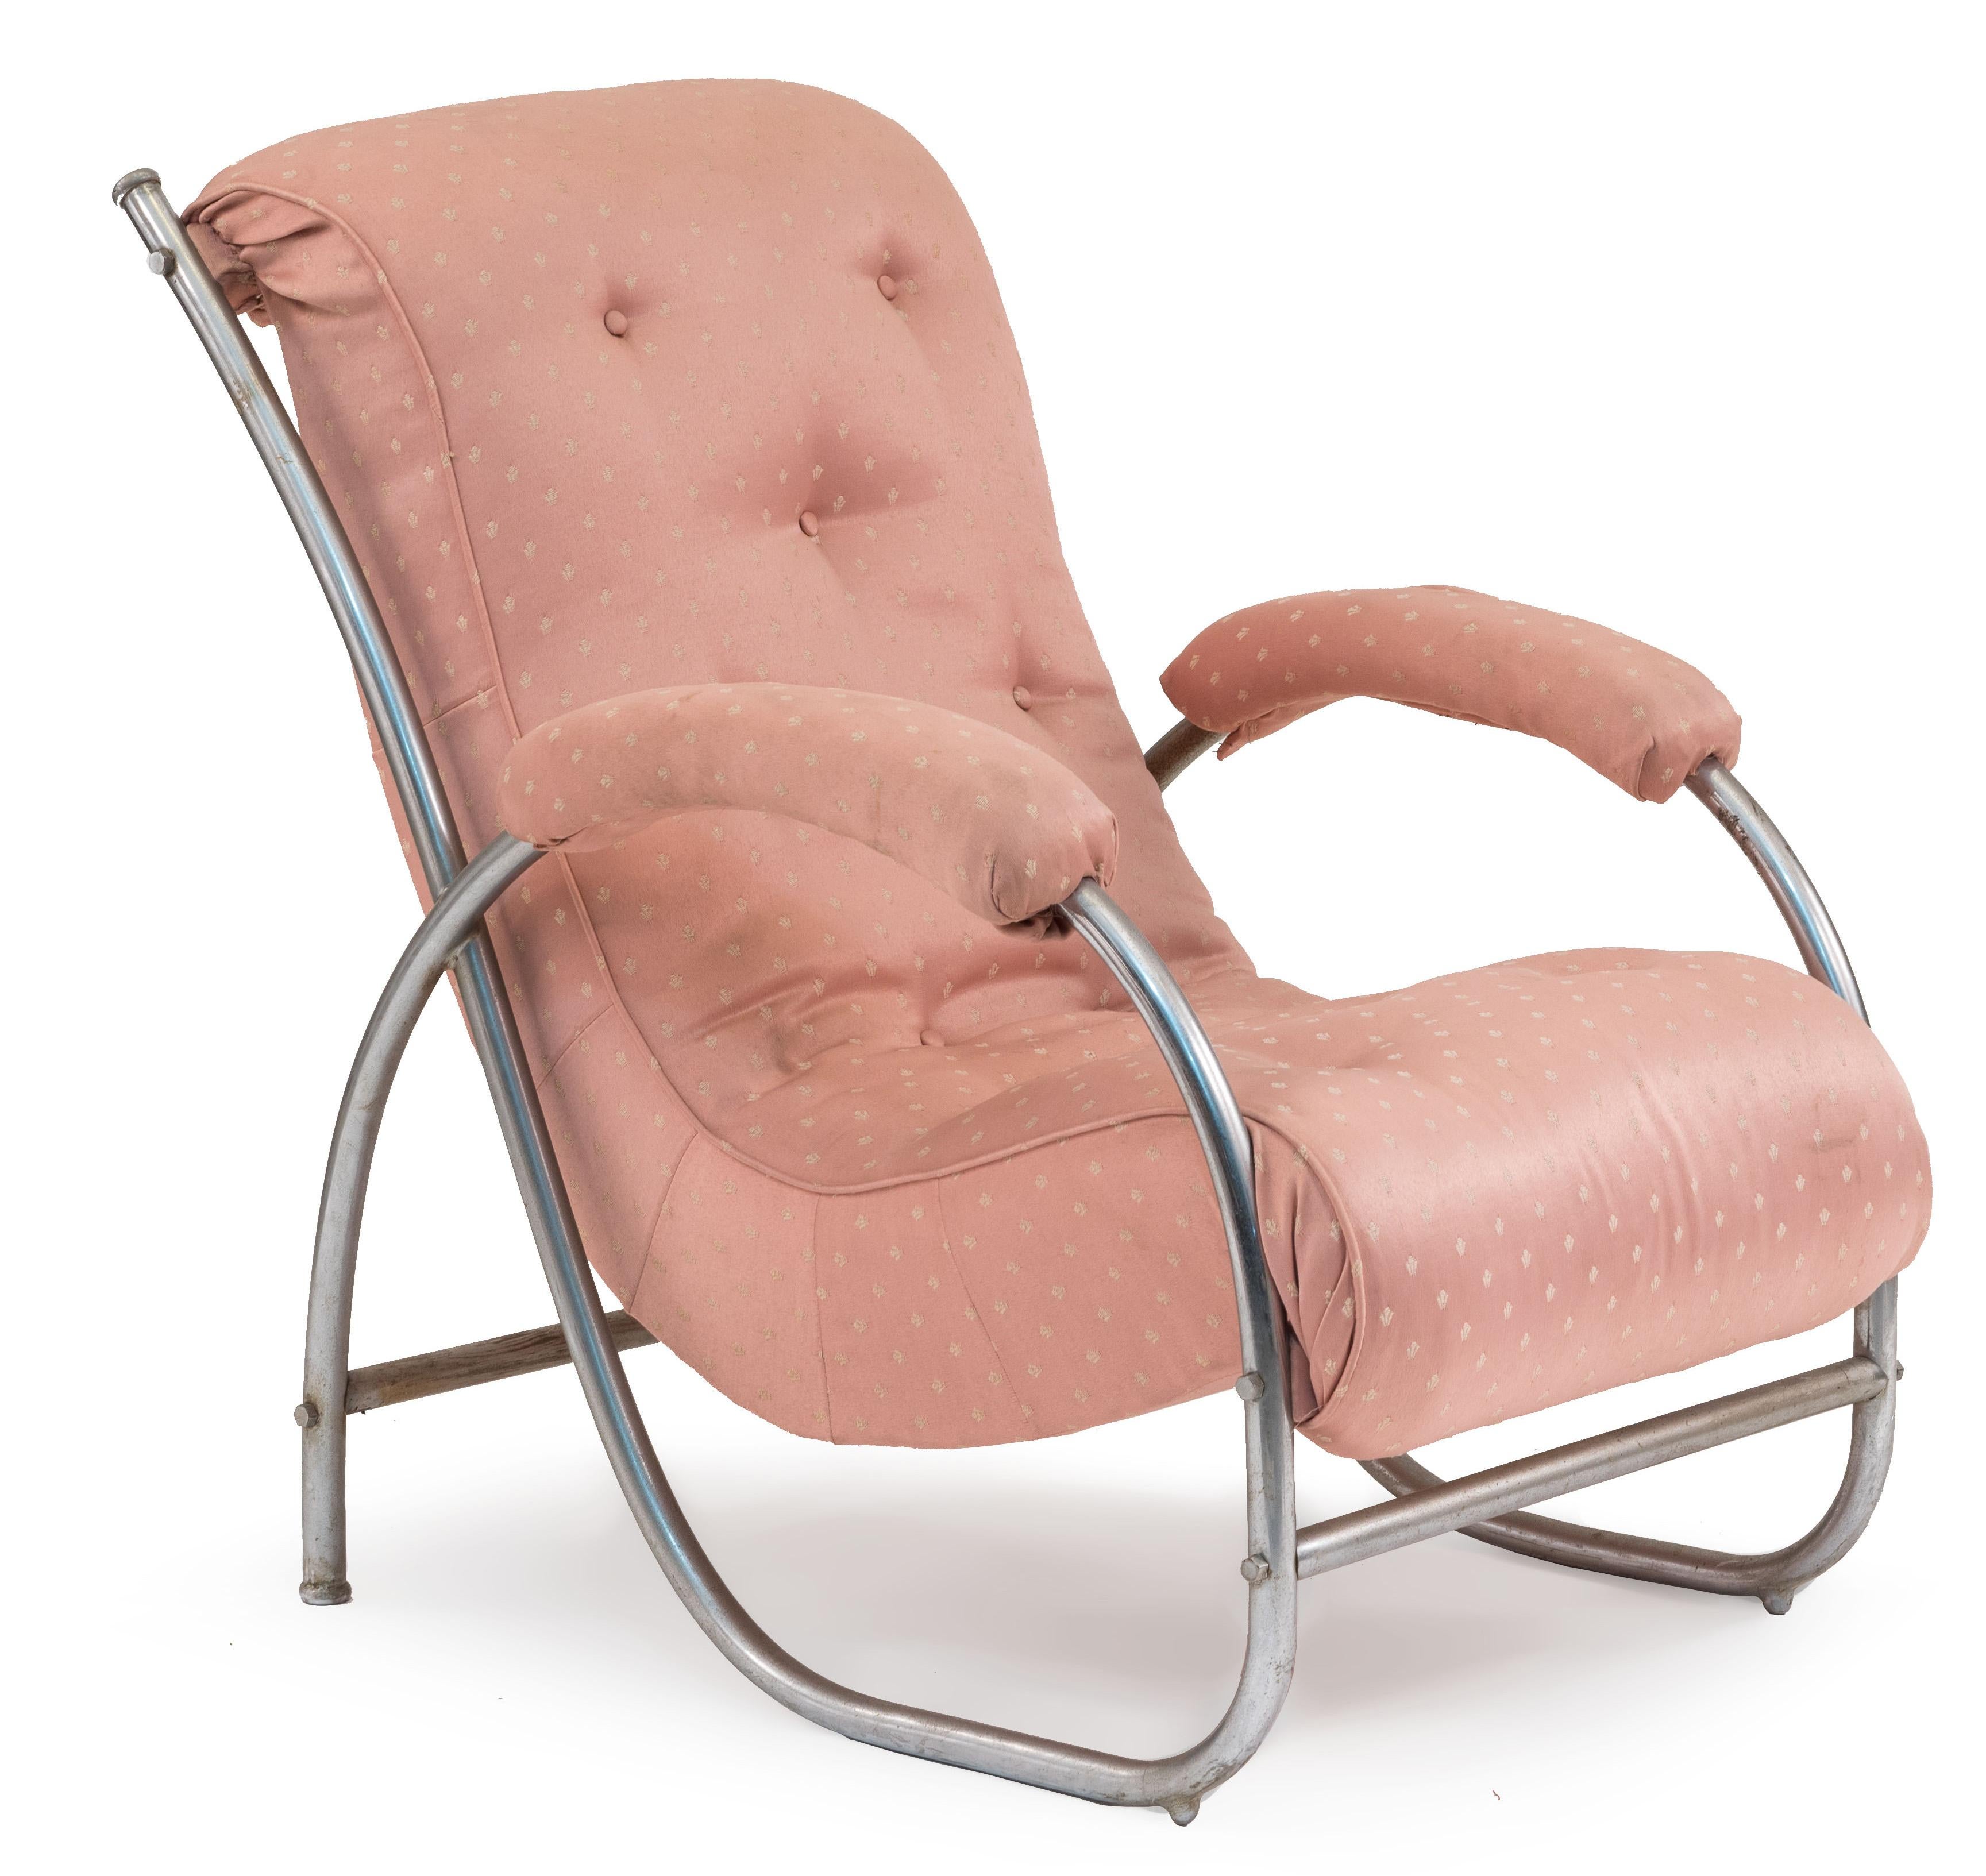 Pair of French Art Deco tubular chrome sleigh back Armchairs with pink upholstery (PRICED AS Pair)
